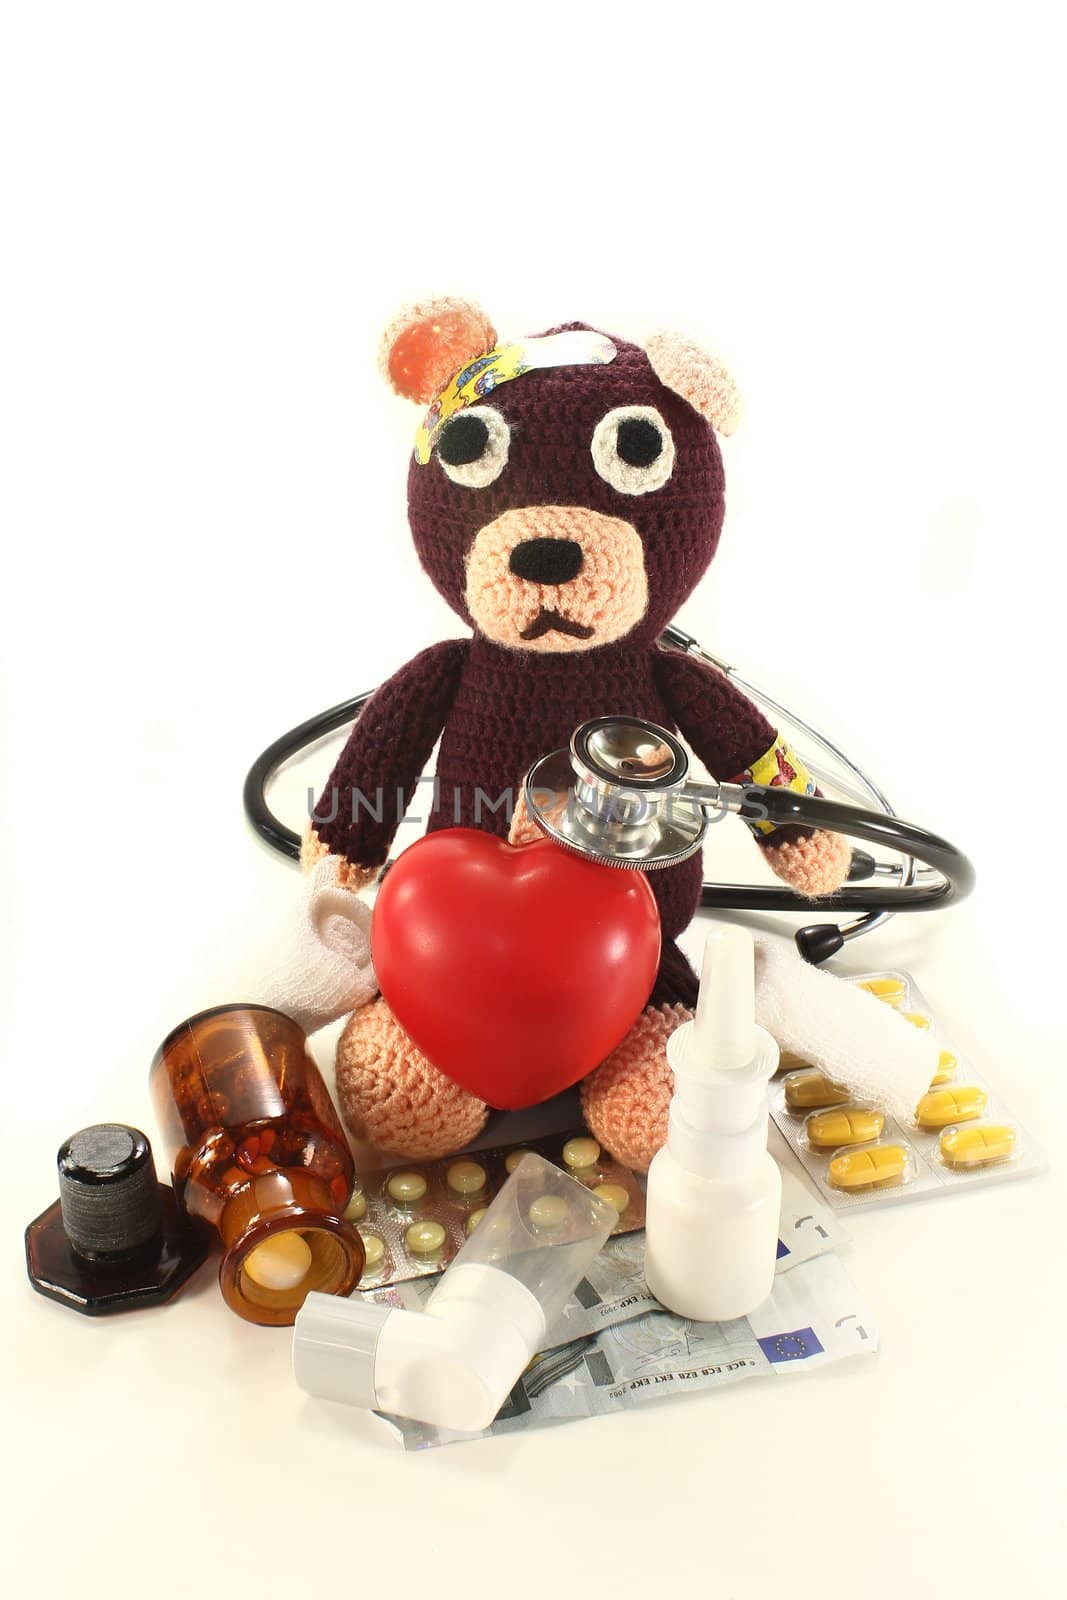 Teddy Bear with various medications and stethoscope